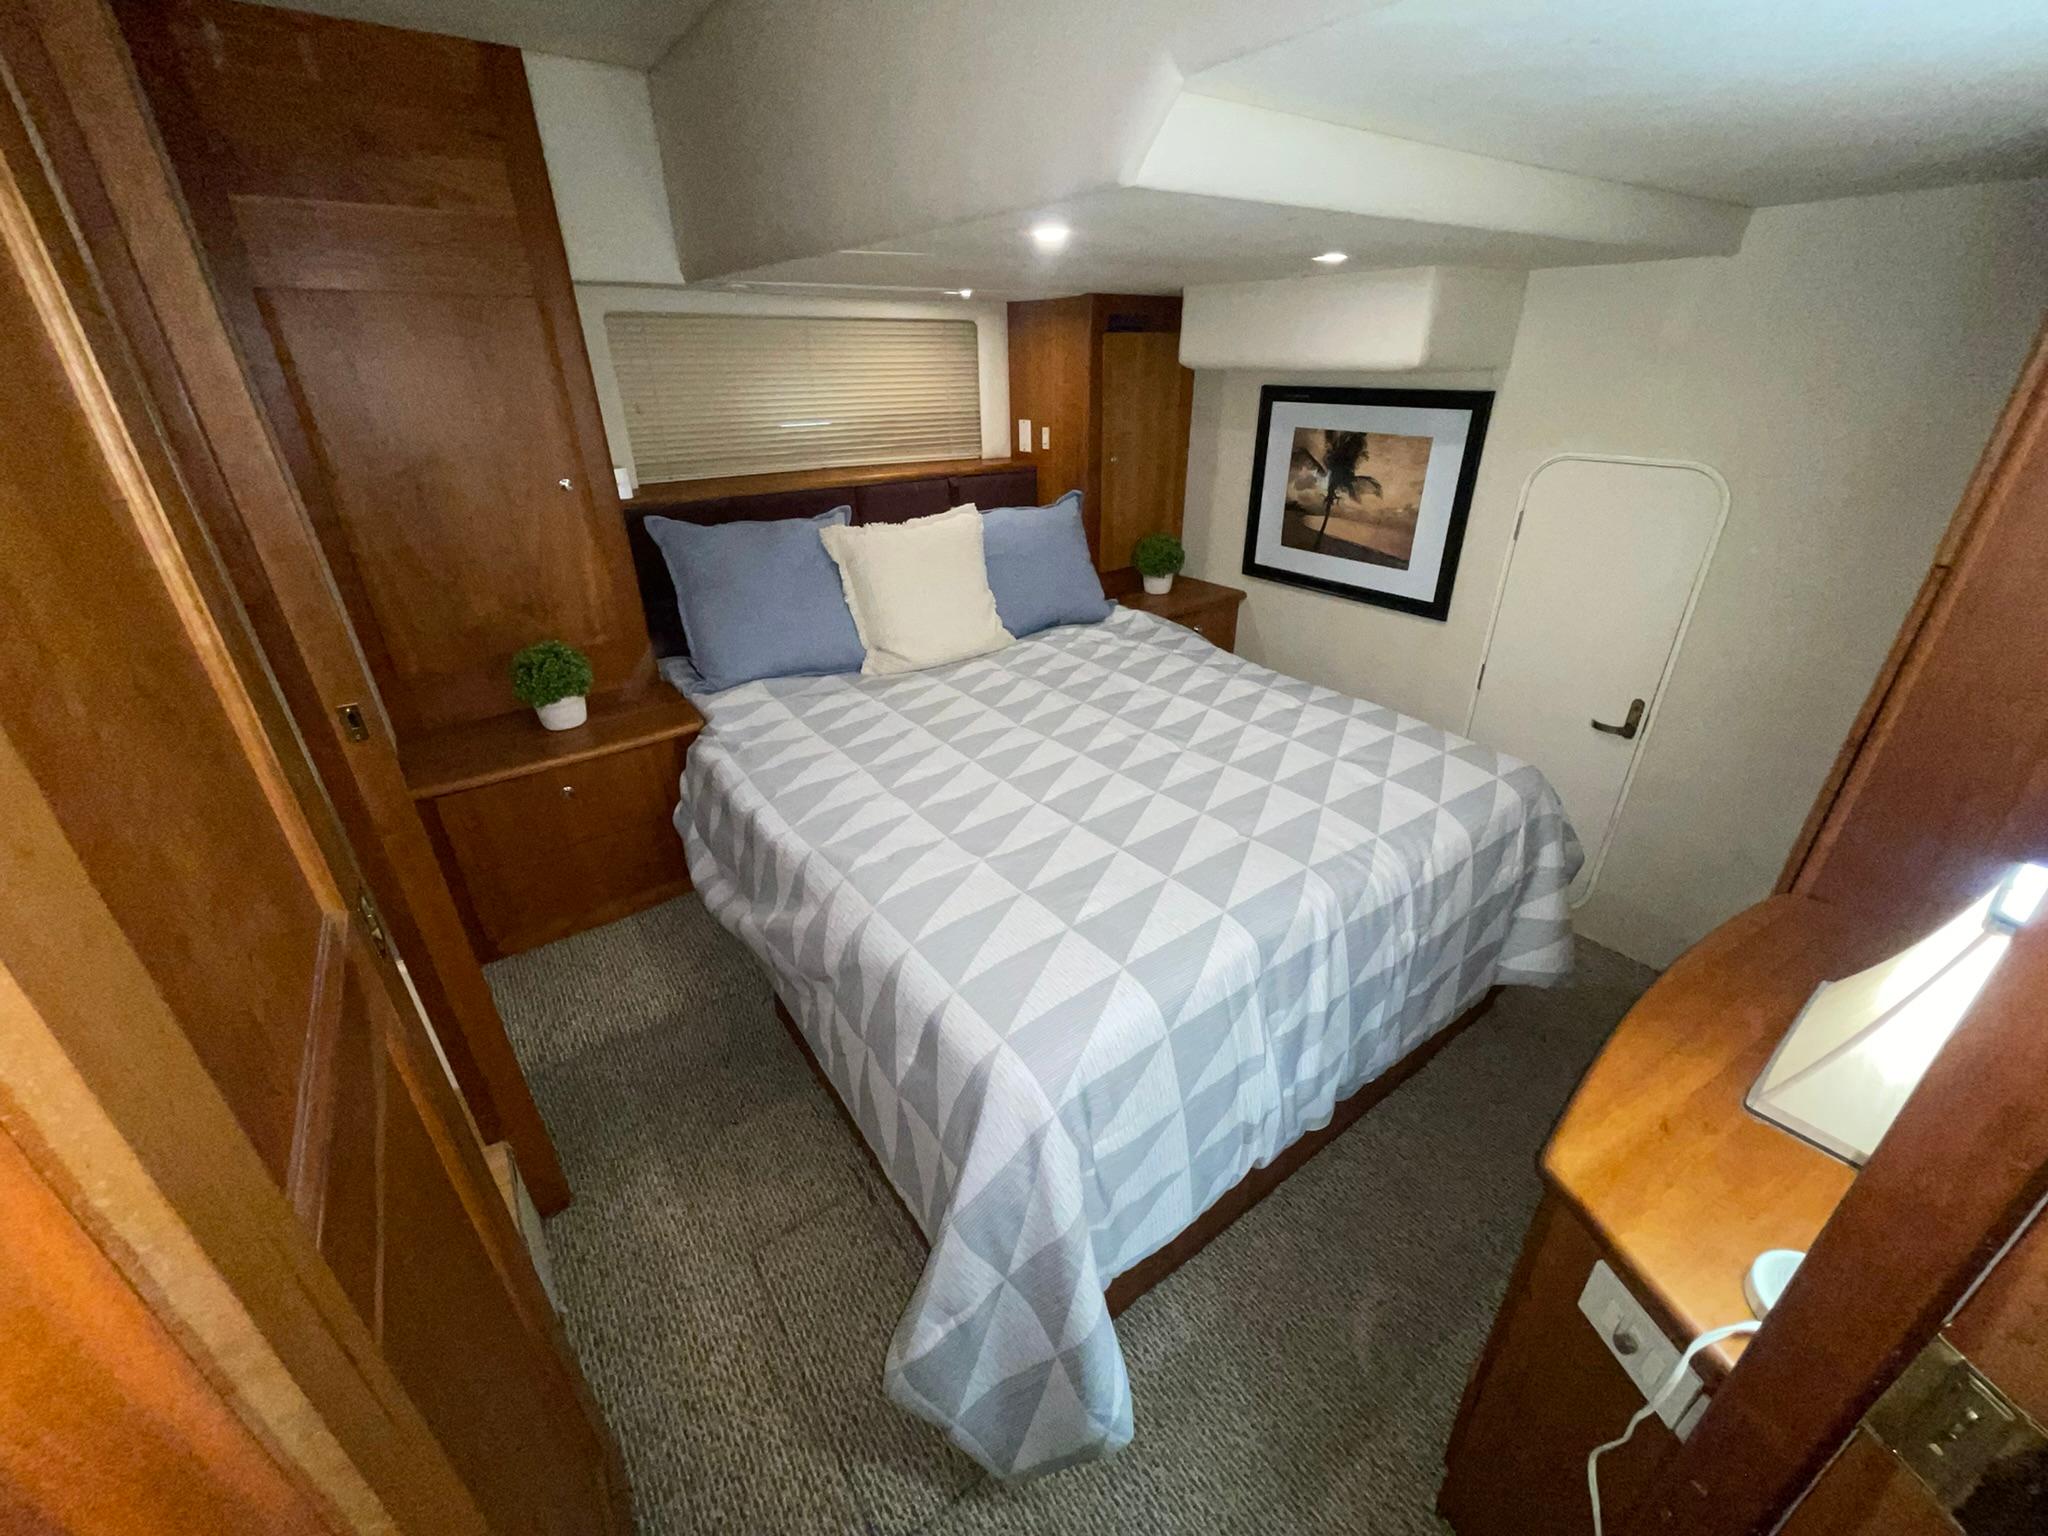 VIP/GUEST STATEROOM